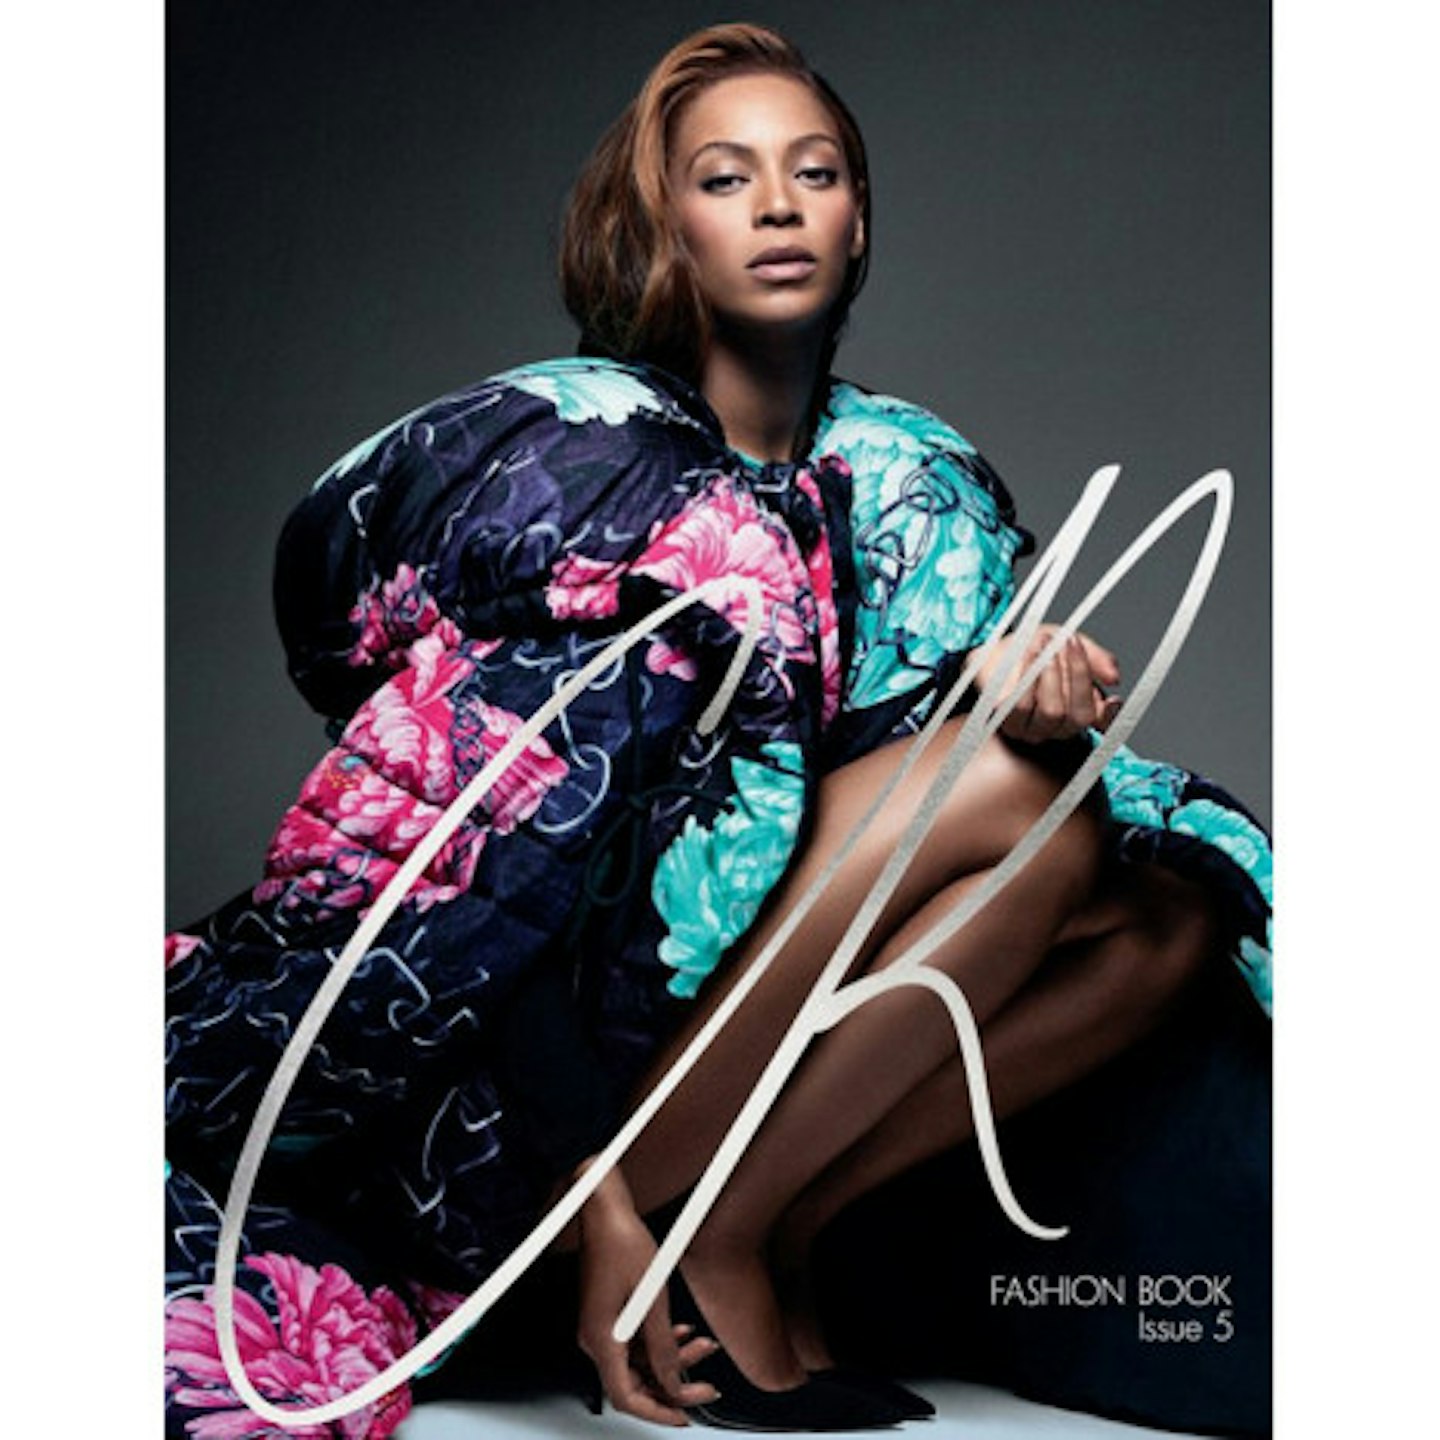 Beyonce covered the fifth issue of CR Fashion Book